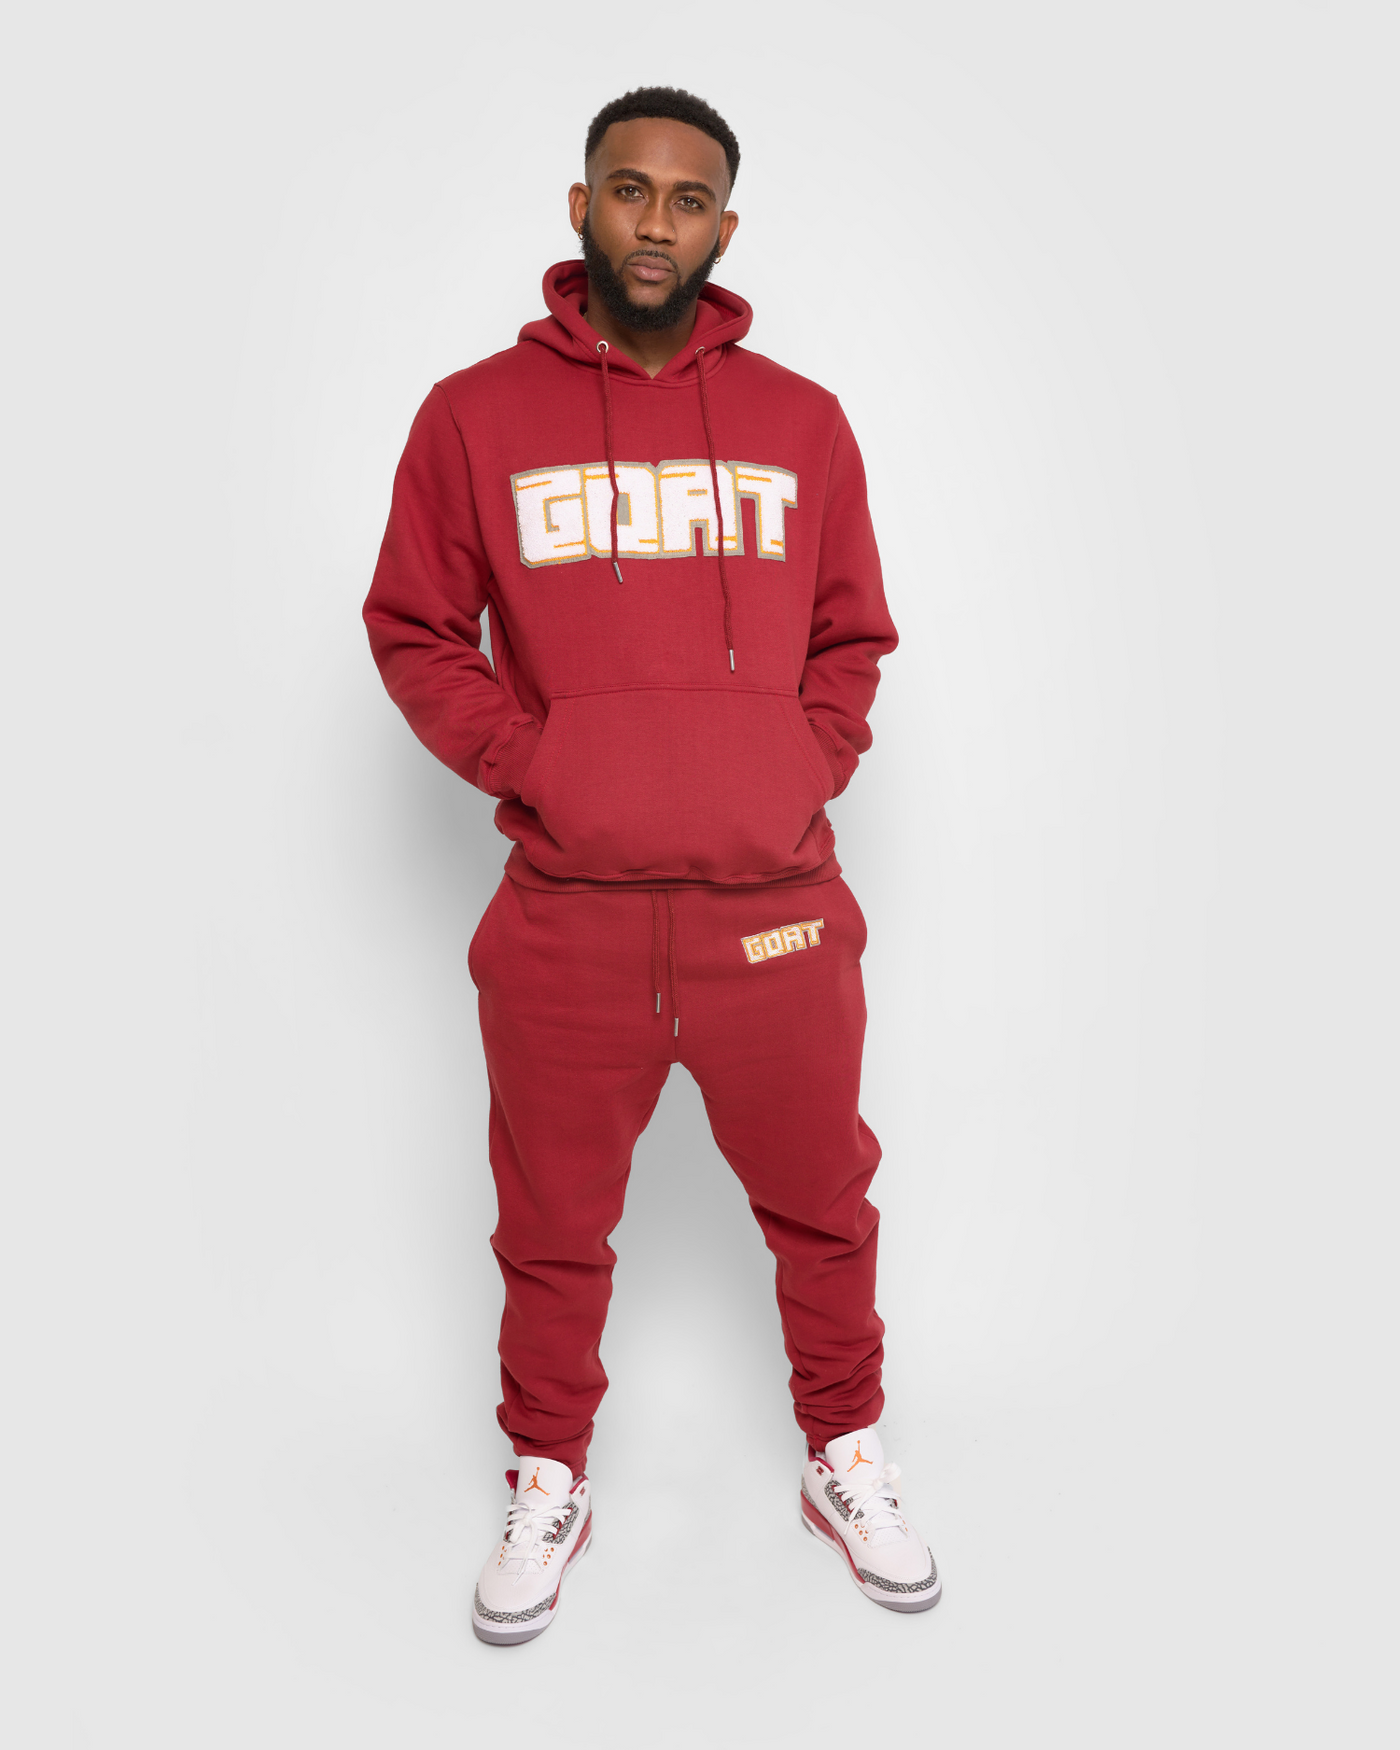 GOAT Classic Chenille Sweatsuit (Cardinal Red)